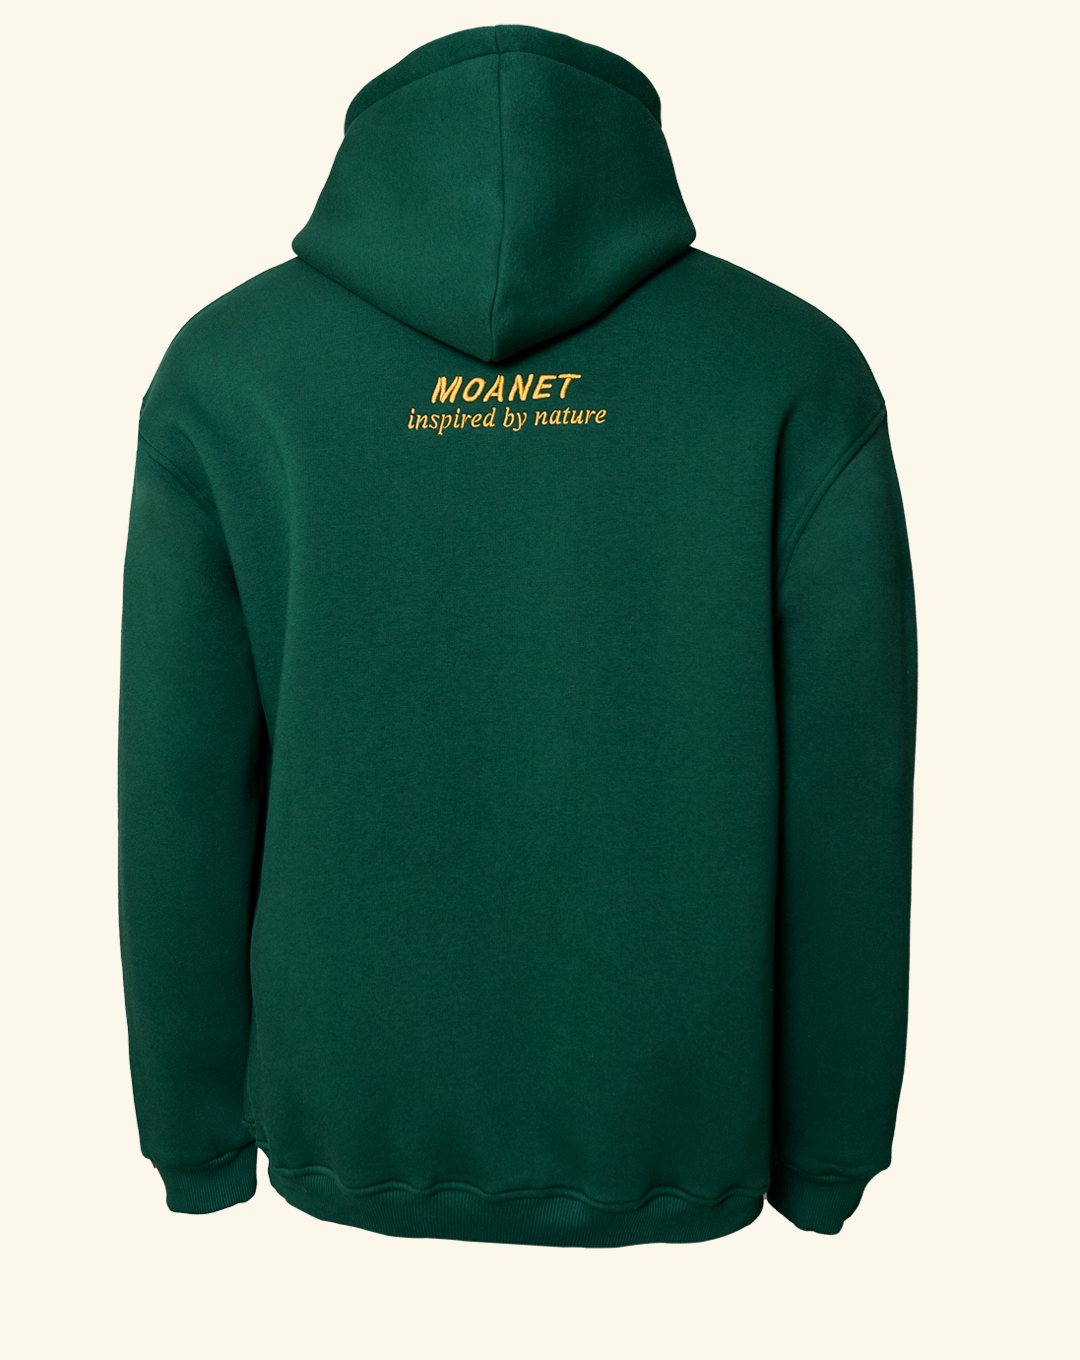 Hoodie IBY forest green - MOANET